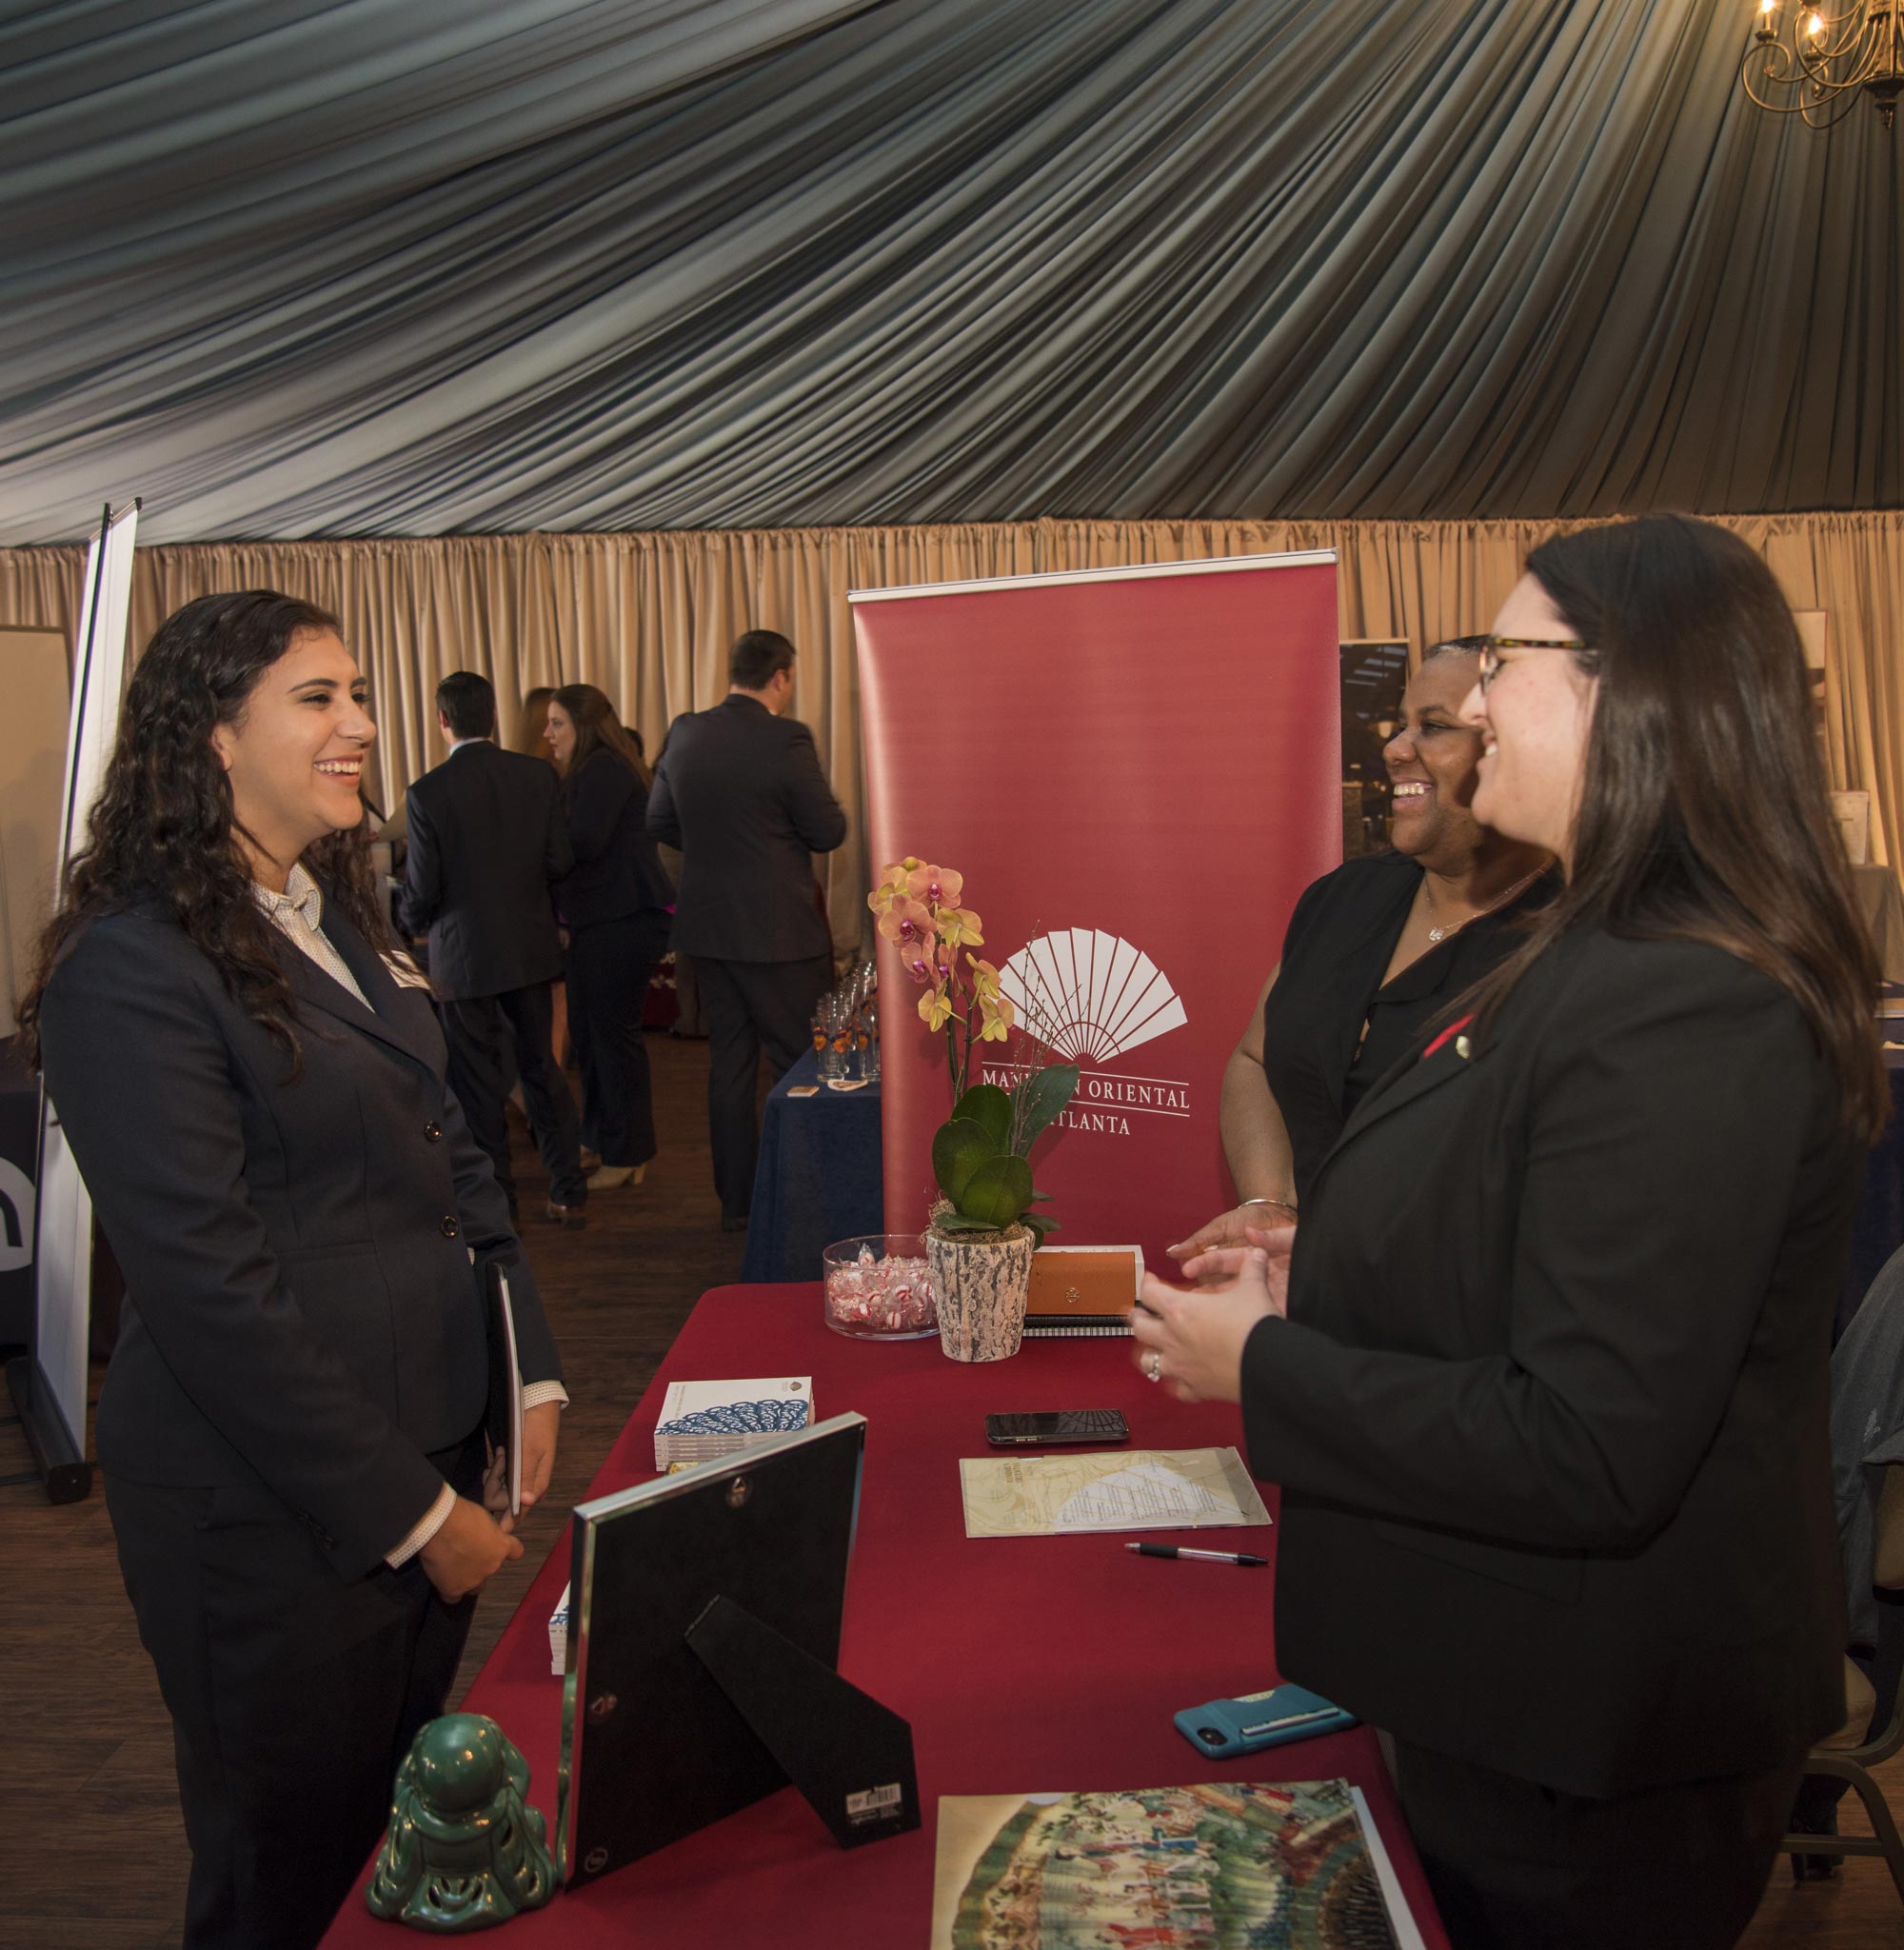 Hospitality student at the visiting a booth at the Career Fair.